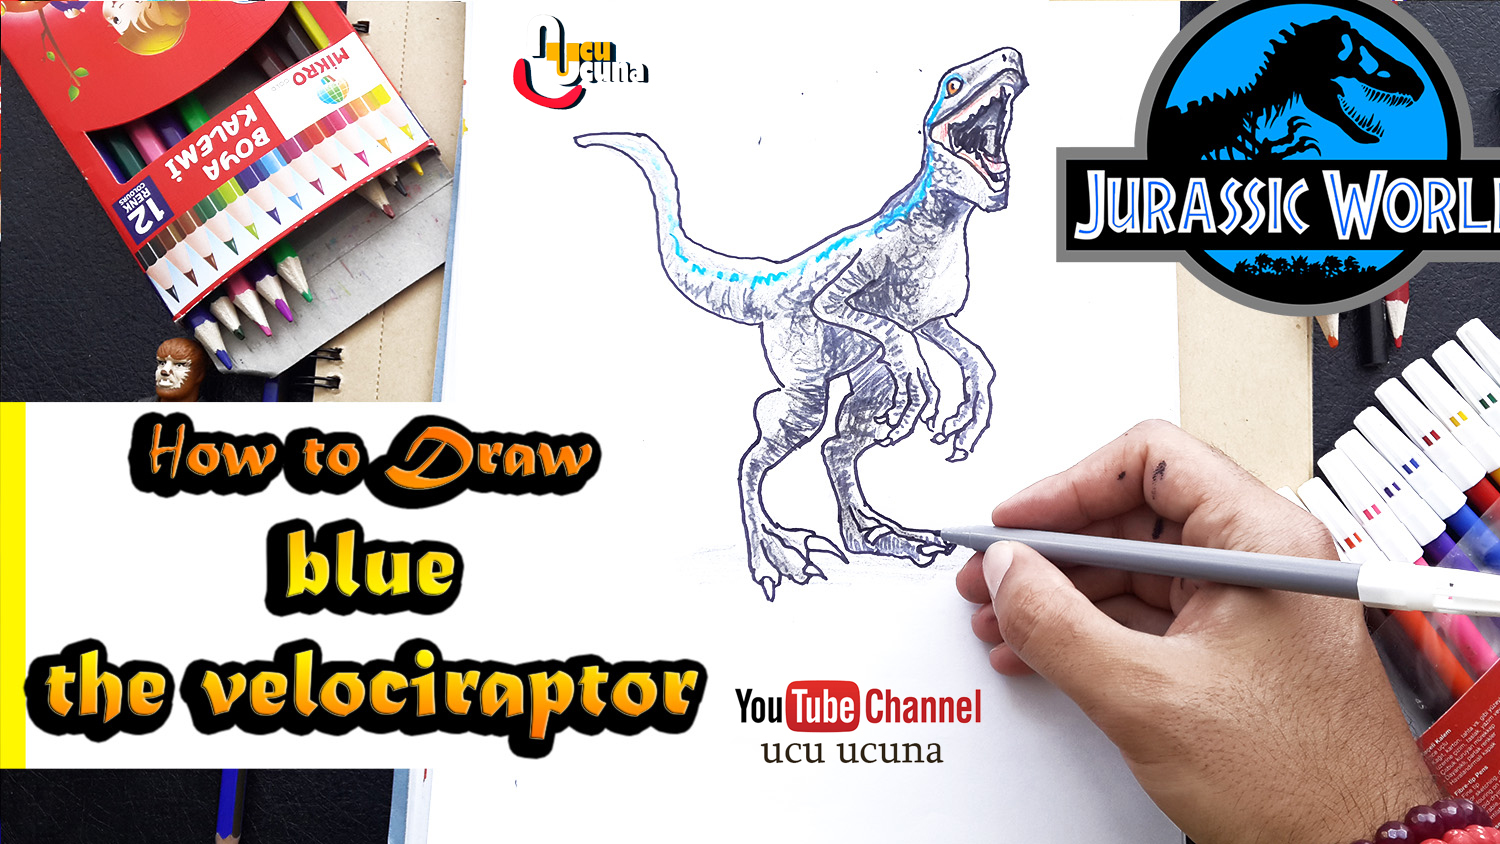 Hi everyone i ll be showing you how to draw balloon  step by step Let s learn draw for  kids  art  important at my life  drow  with me i hope you like funny videos  tutorial if you like my draw you click my youtube channel ucu ucuna